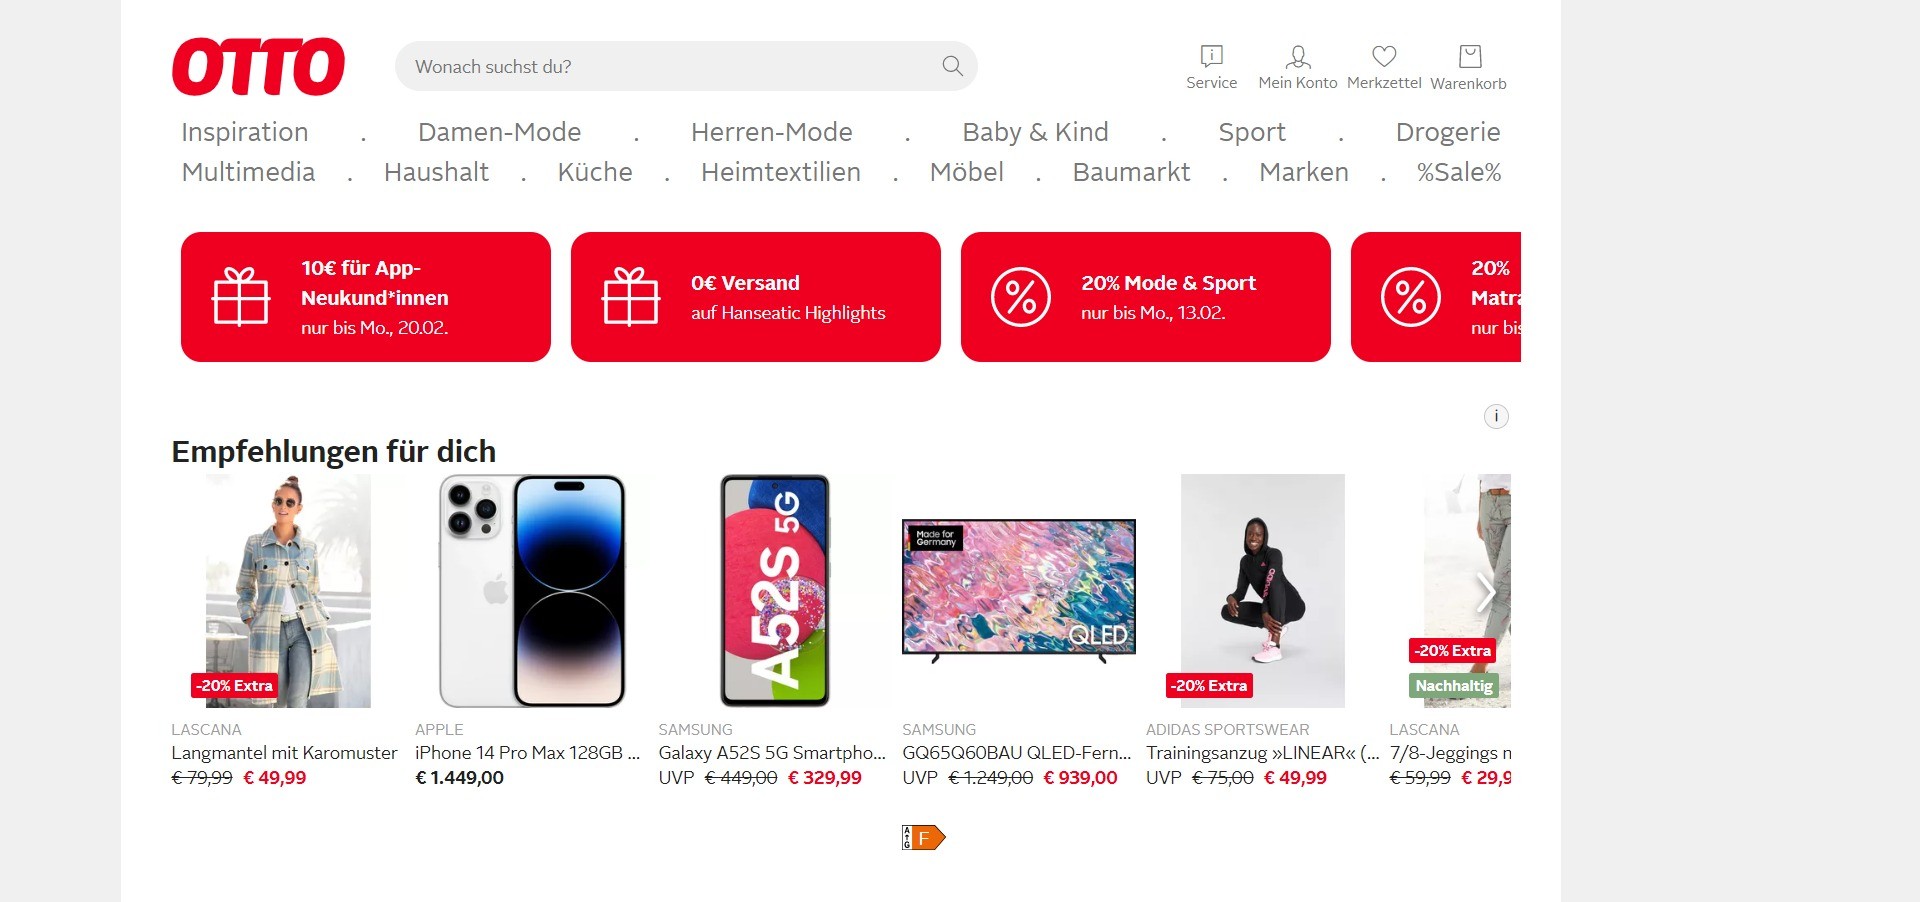 Screenshot of otto.de’s homepage nowadays, featuring categories like fashion, baby gear, drugstore, hardware and kitchenware